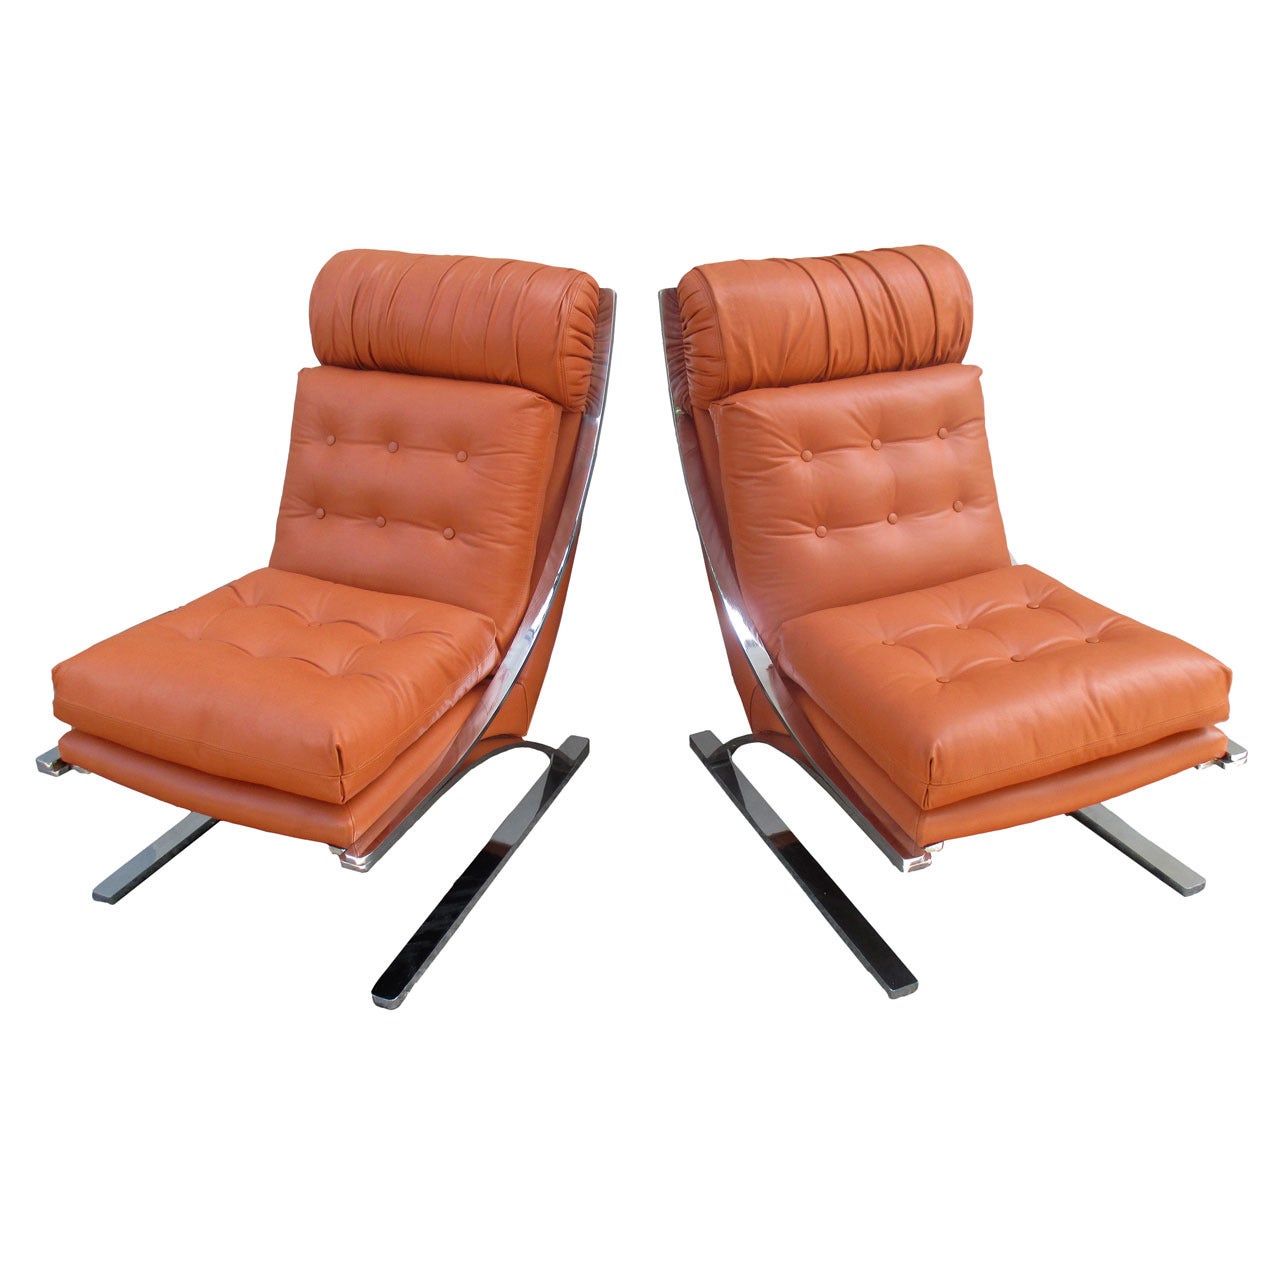 Pair Of Leather And Metal Lounge Chairs Rare Version "z" Chair By Paul Tuttle